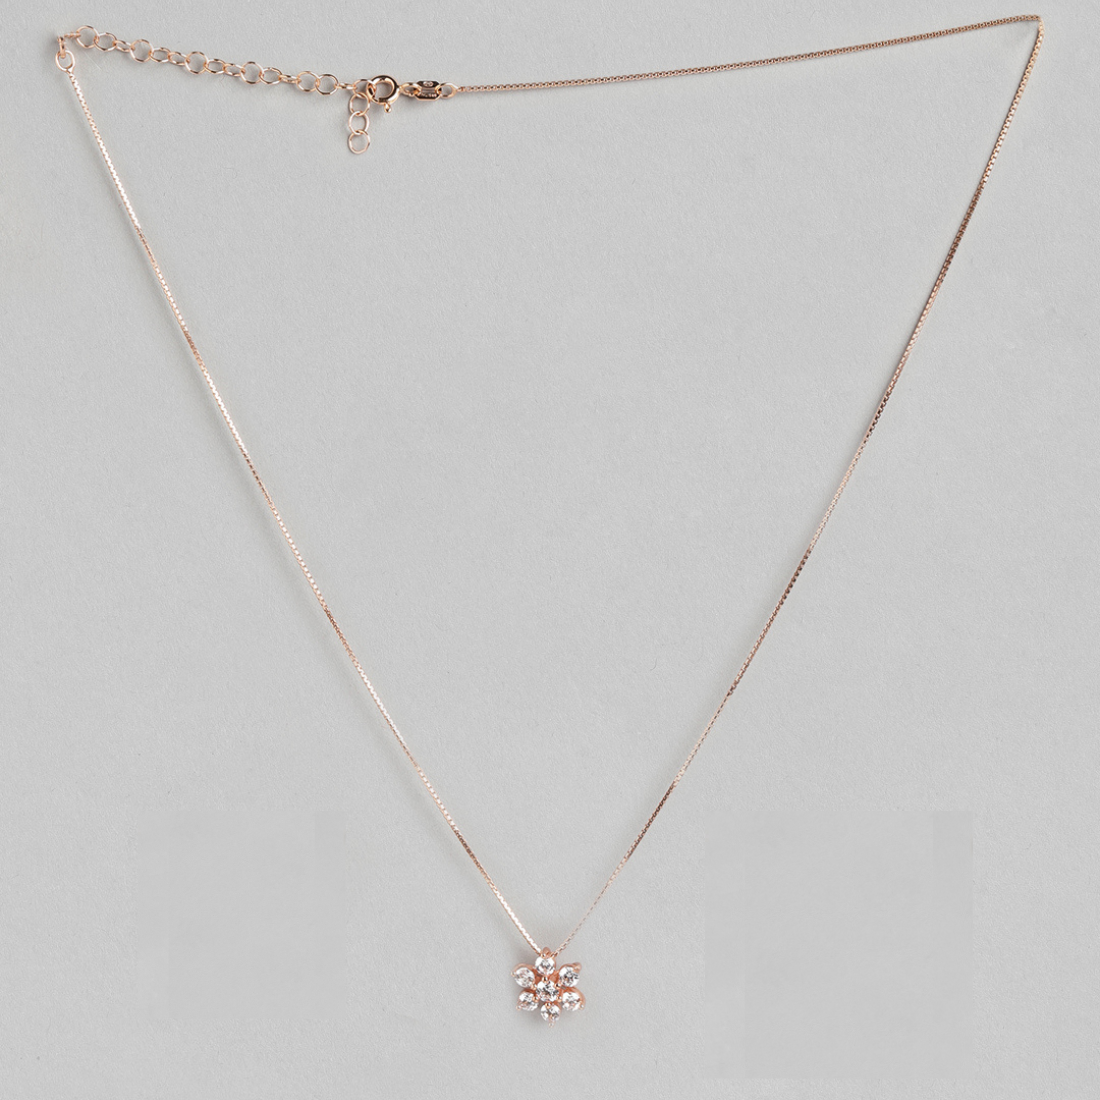 Blooms in Harmony - Rose Gold & Silver Floral Necklace Earring Set